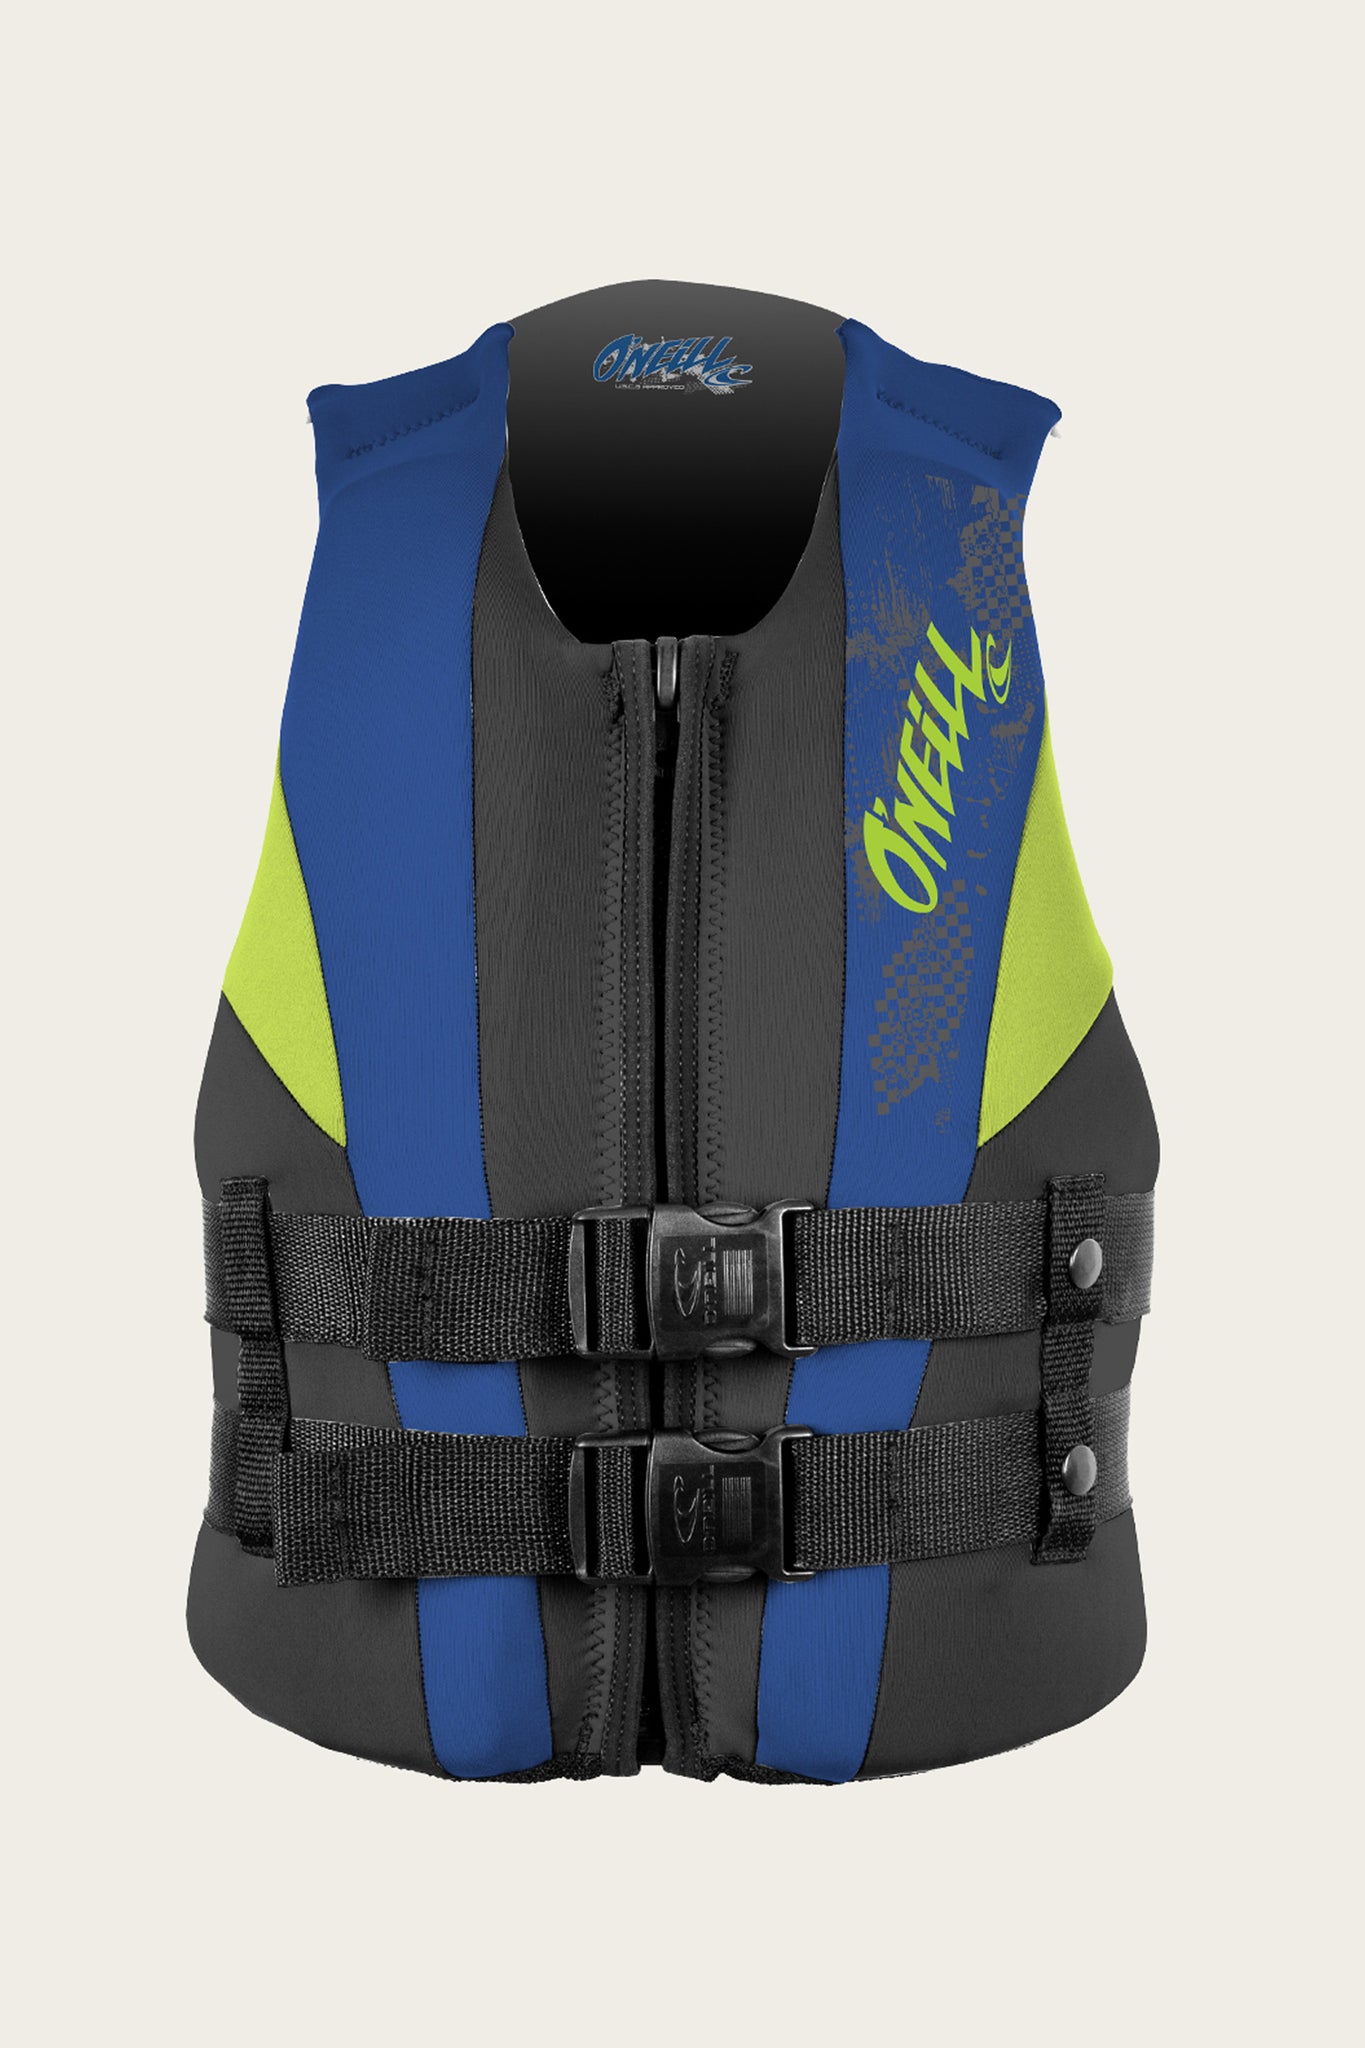 Youth Reactor Uscg Vest - Blk/Pac/Dayglo | O'Neill